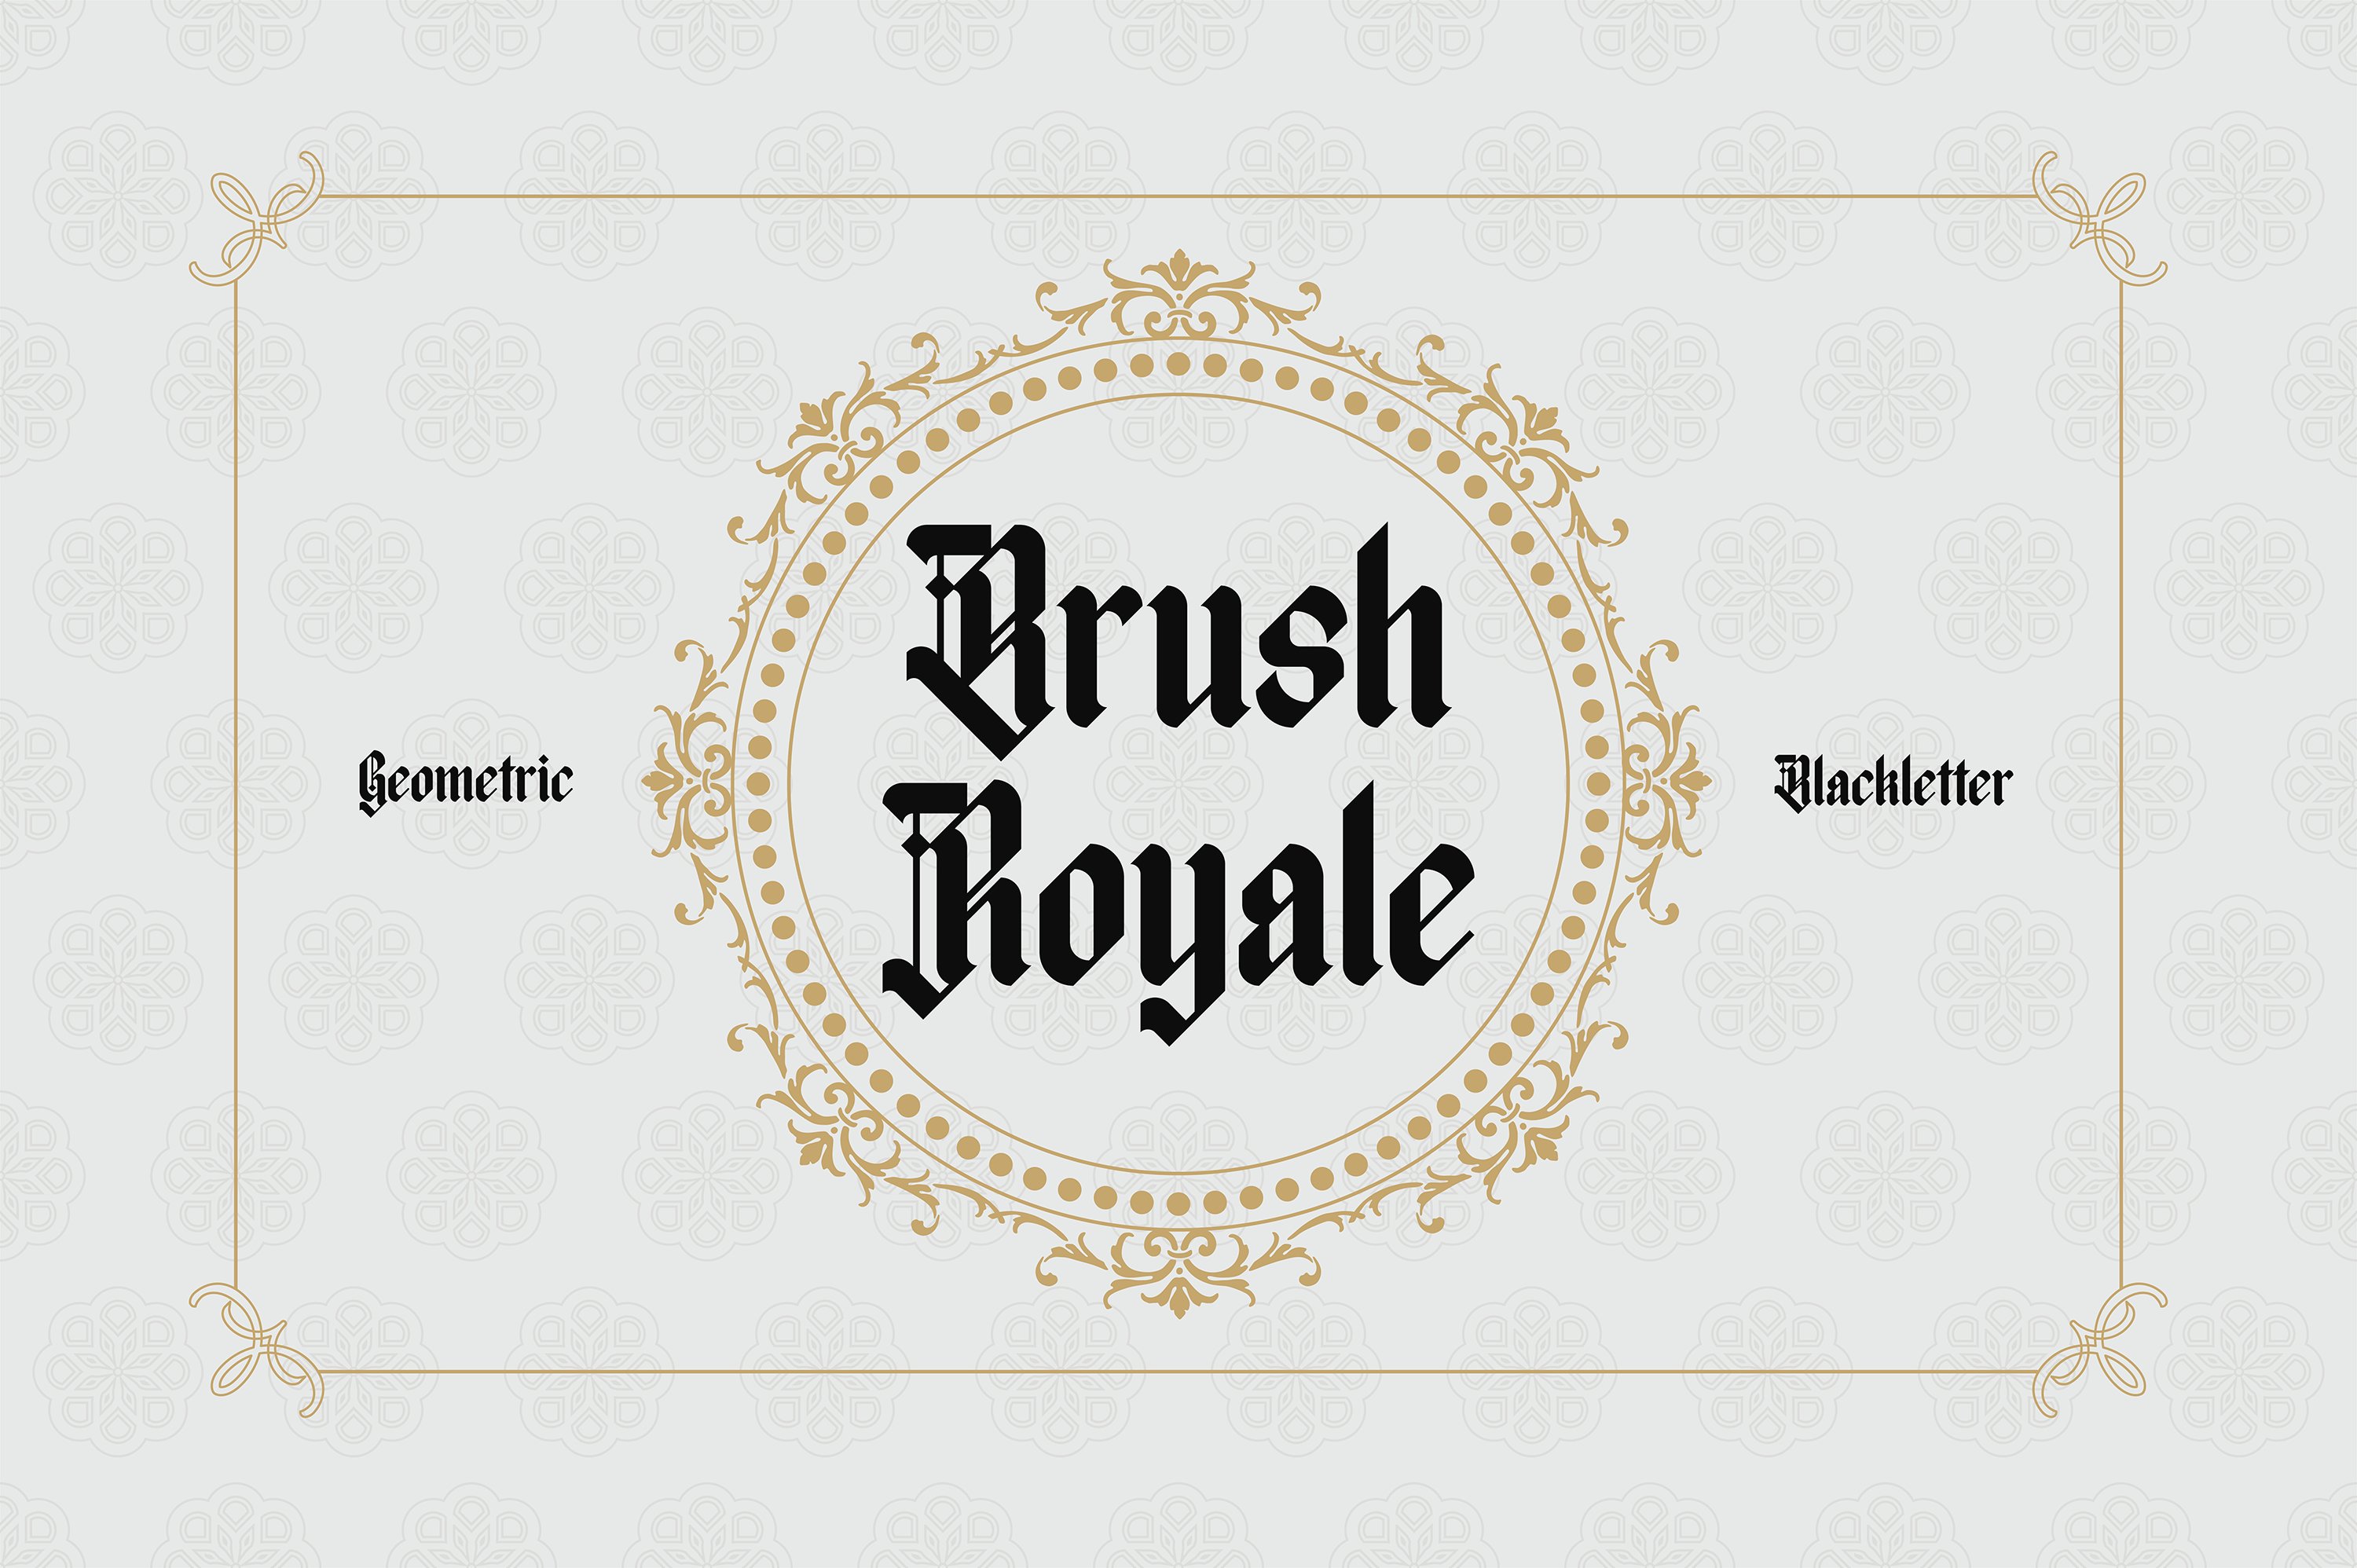 Brush Royale | A Royal-Style Font cover image.